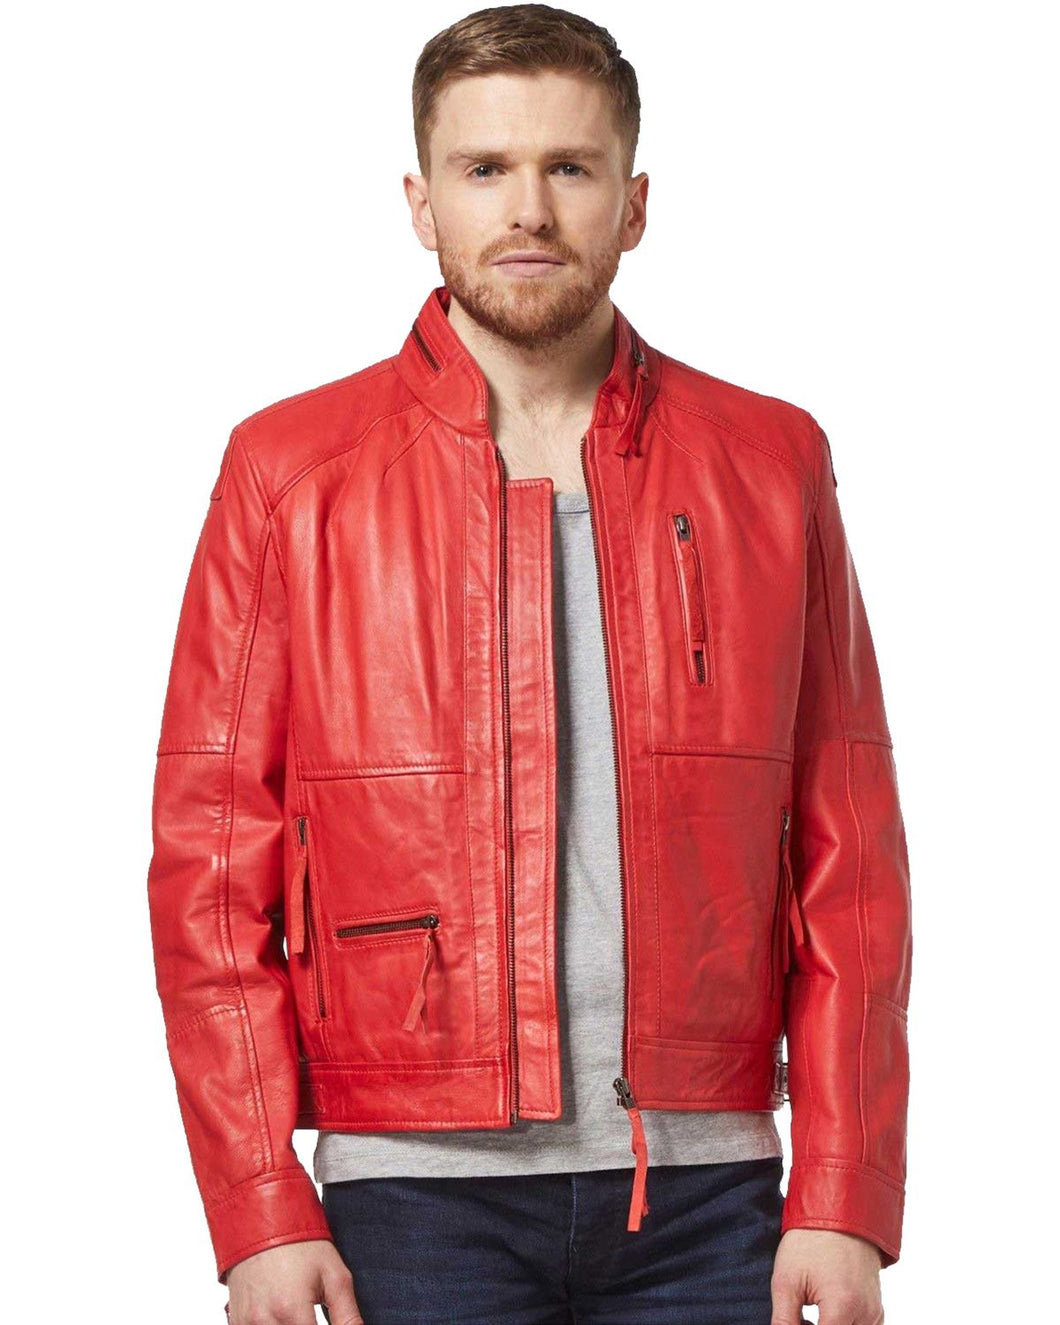 Men's Classic Red Biker Real Leather Jacket